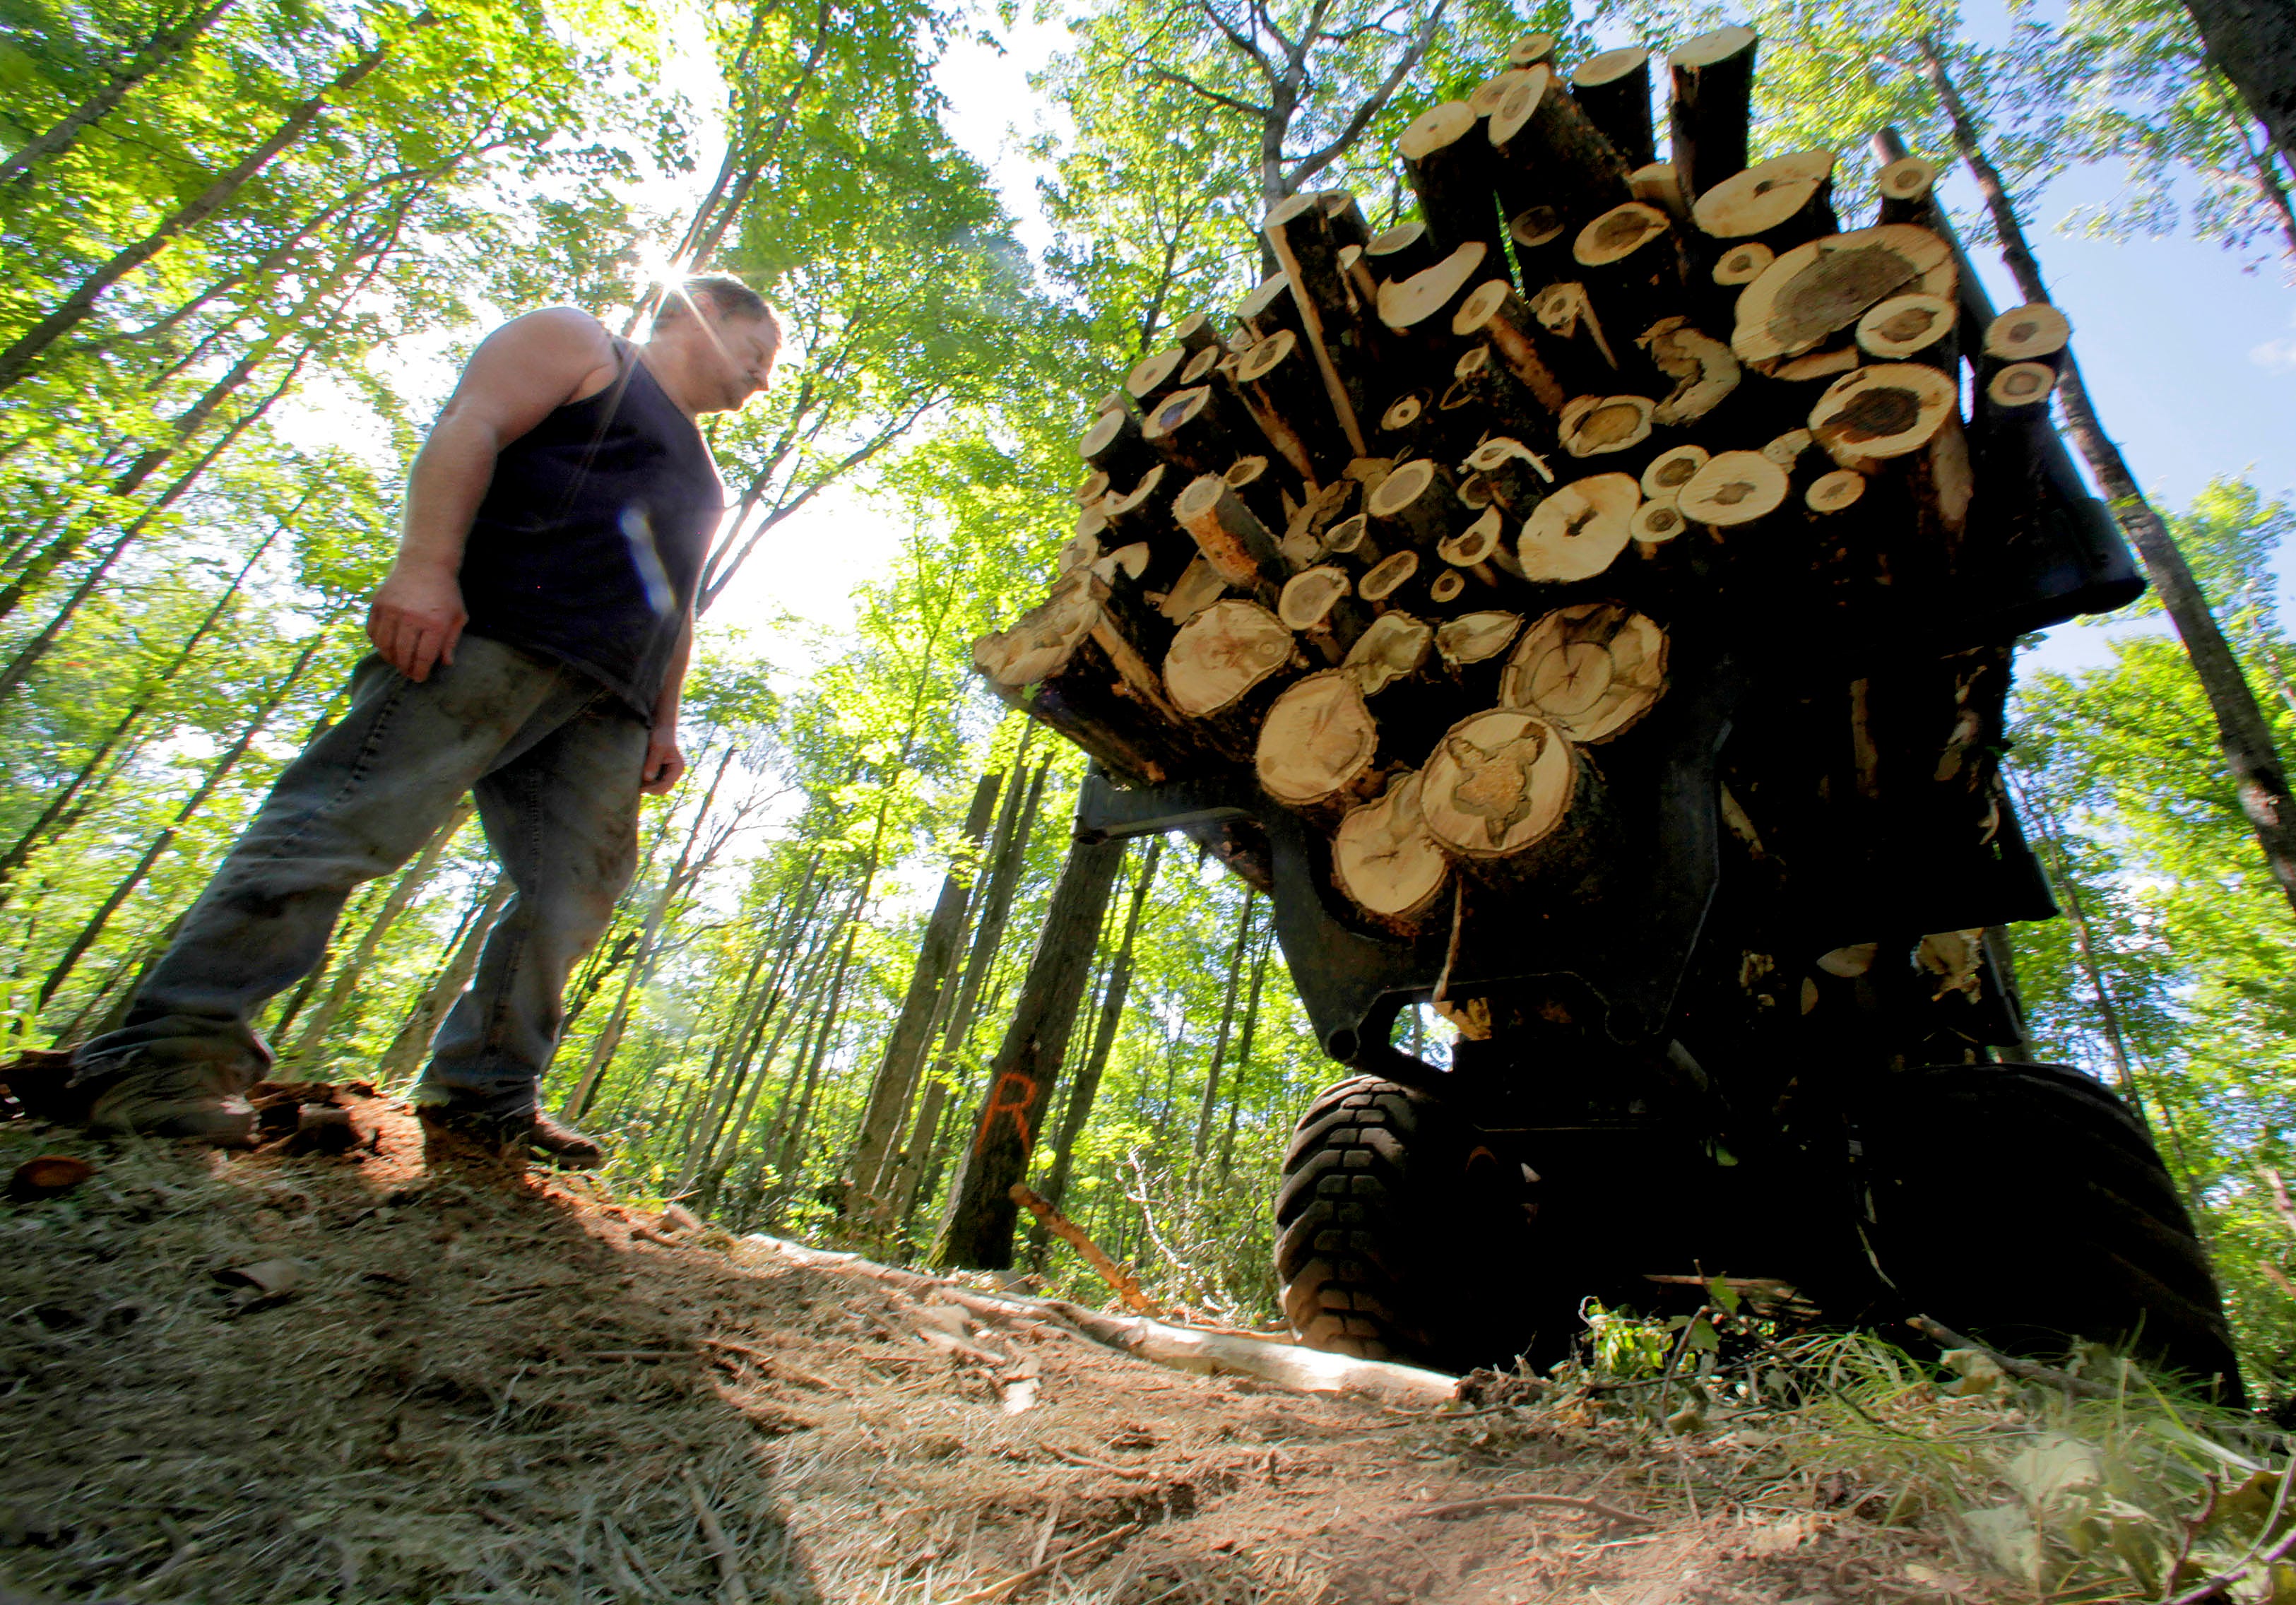 Paper Pixel - ÊPark Falls Mill - logging - Wisconsin -Ê  Mike Ziembo, an owner and operator for Phil Thums Harvesting stands next to a forwarder, which picks up cut logs, stacked full of freshly cut trees in the Chequamegon National ForestÊin northern Wisconsin on Tuesday, August 7, 2012.Ê Photo by Mike De Sisti / MDESISTI@JOURNALSENTINEL.COM